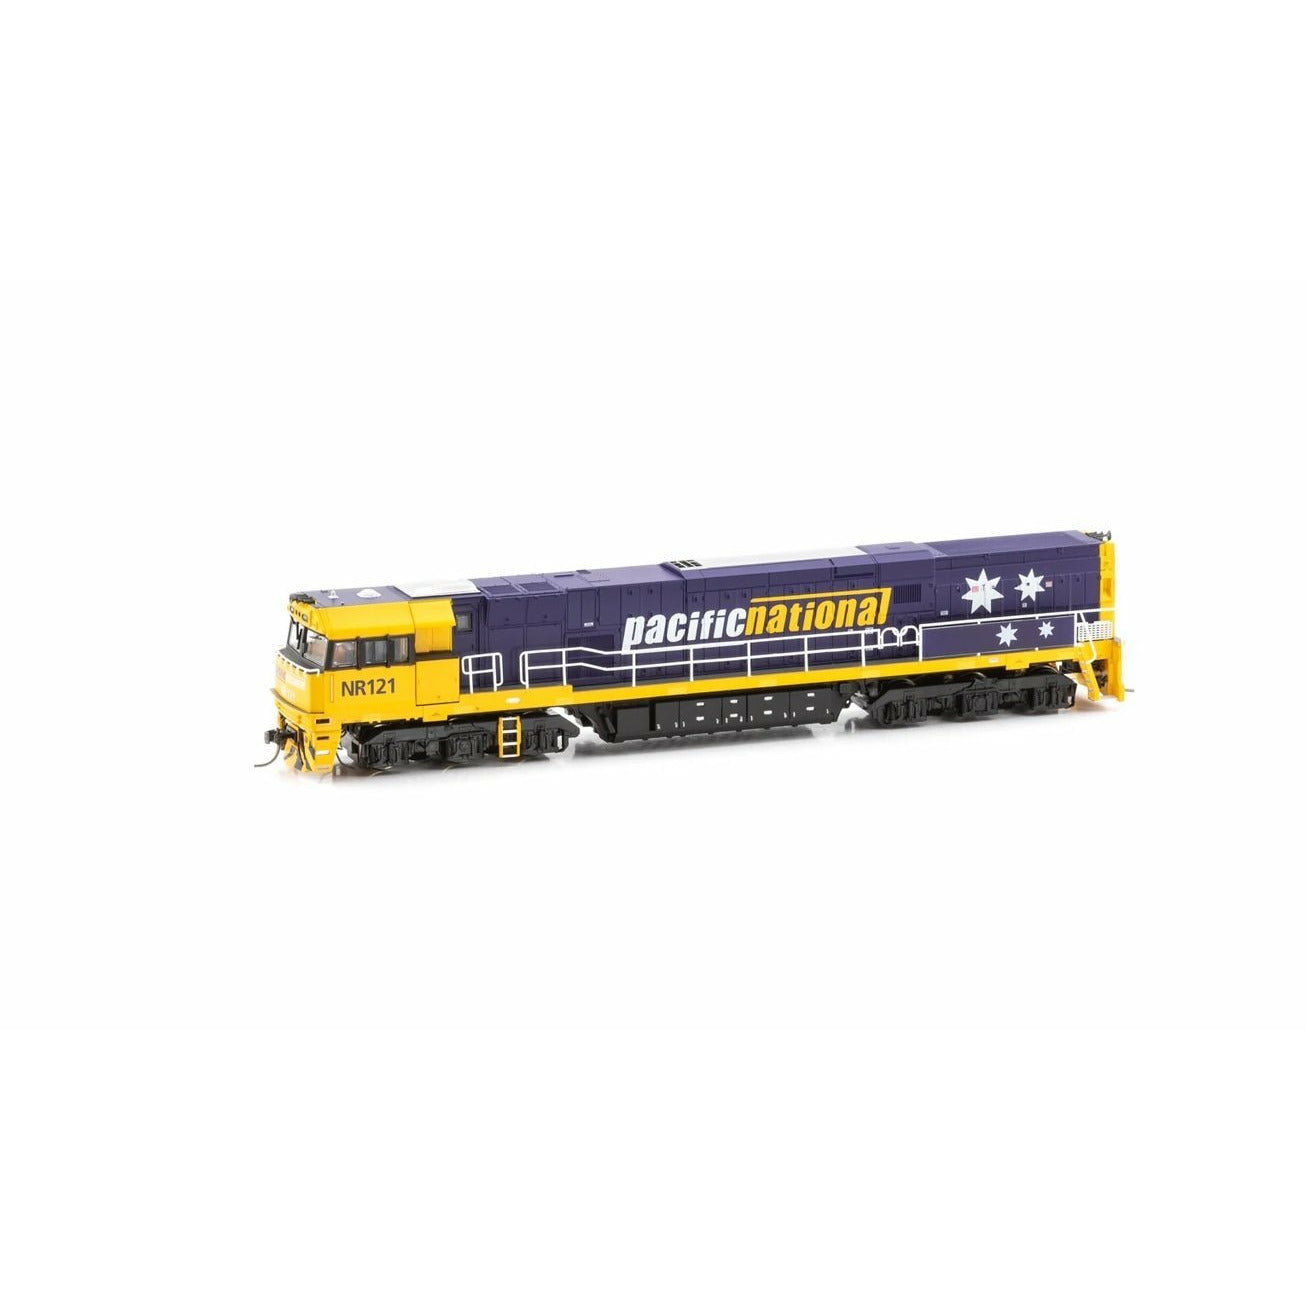 SDS MODELS HO NR121 Pacific National 4 Stars DCC Sound